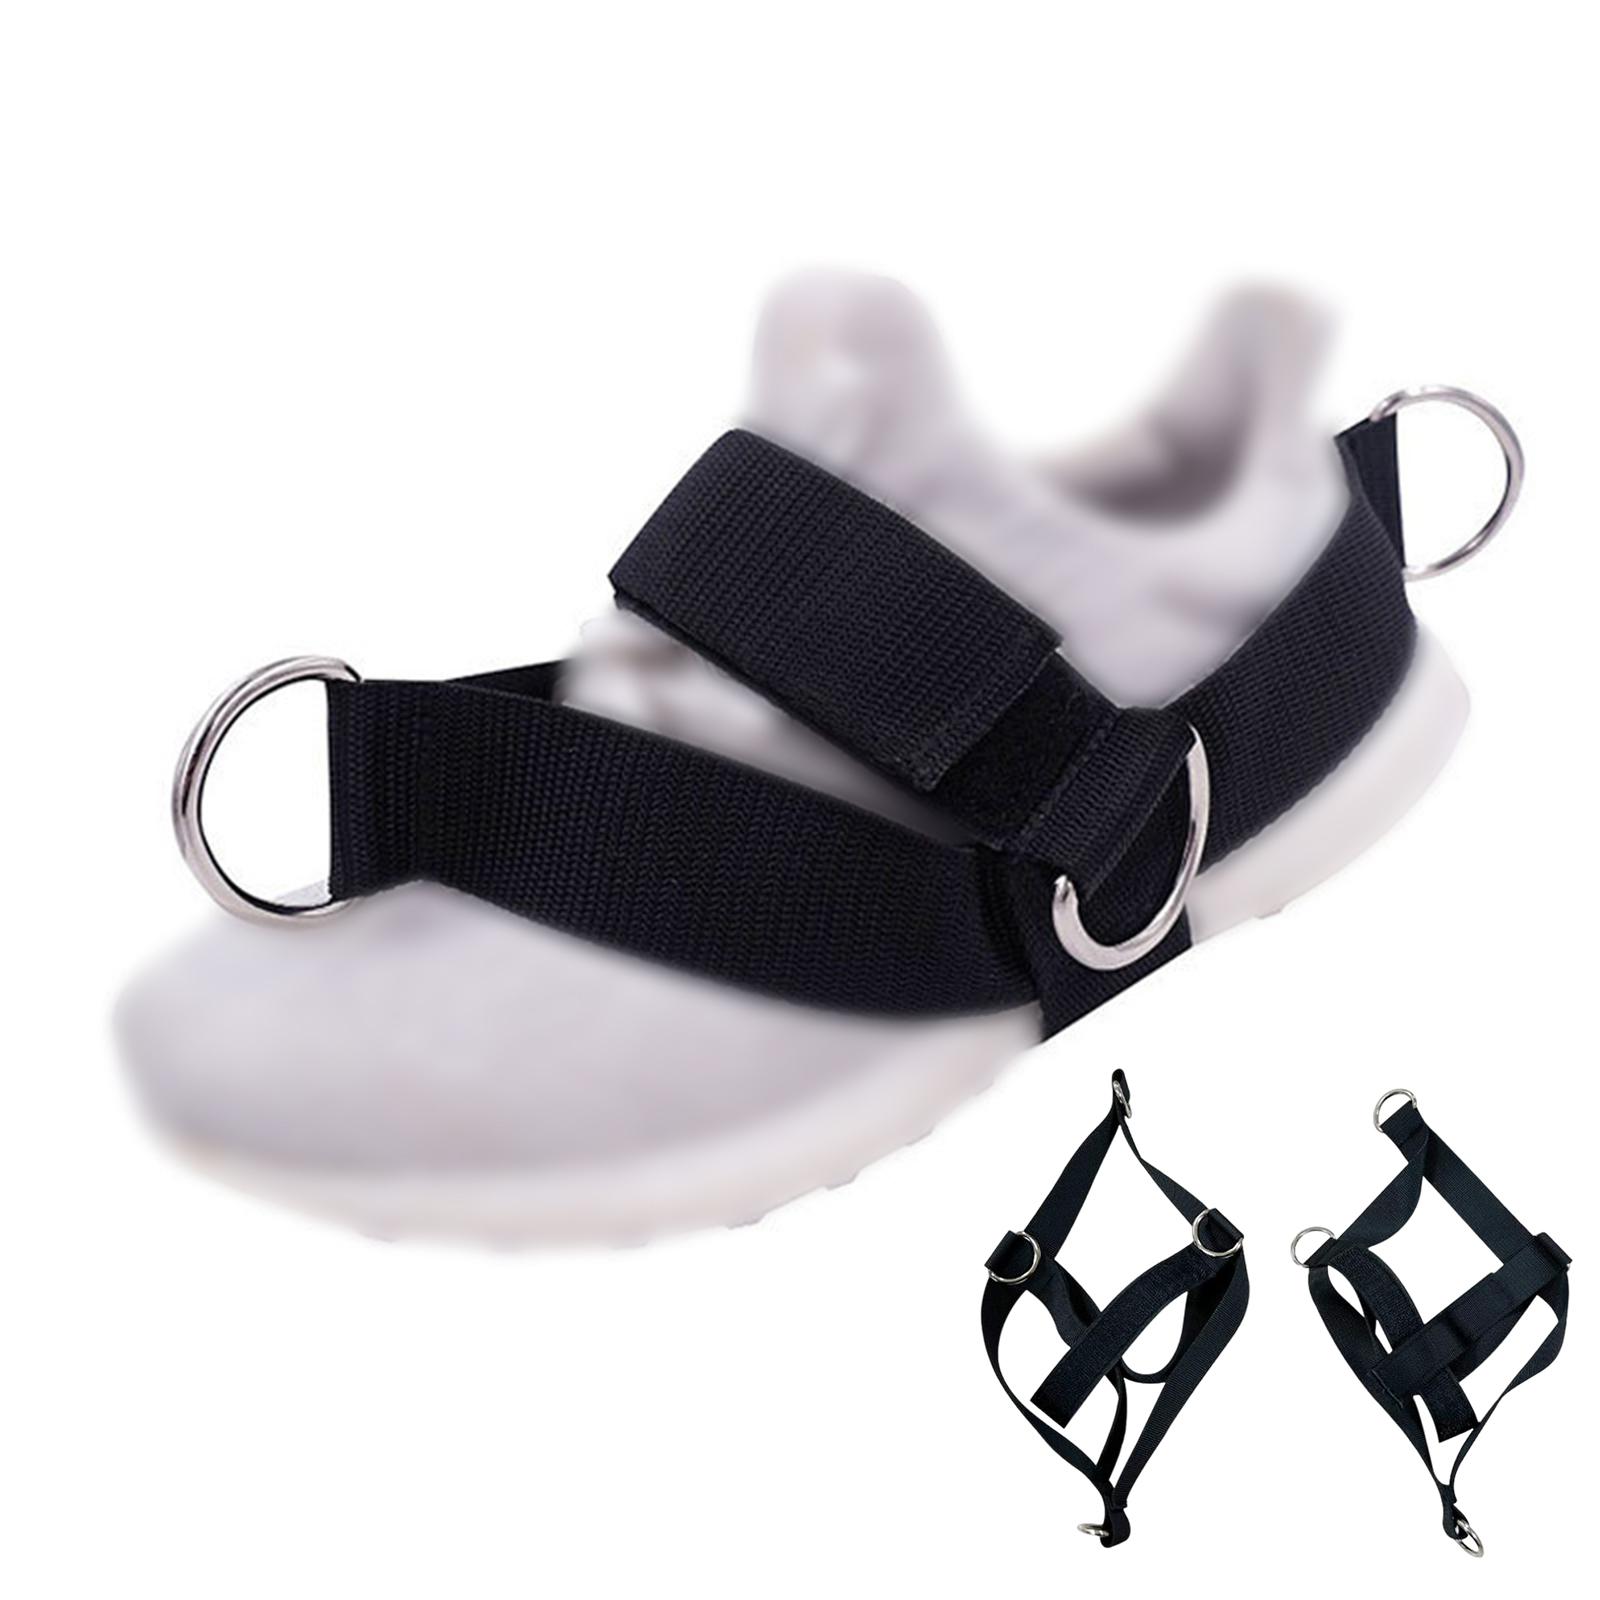 2x Ankle Strap 4 Gym Machine Attachment for Fitness Bodybuilding